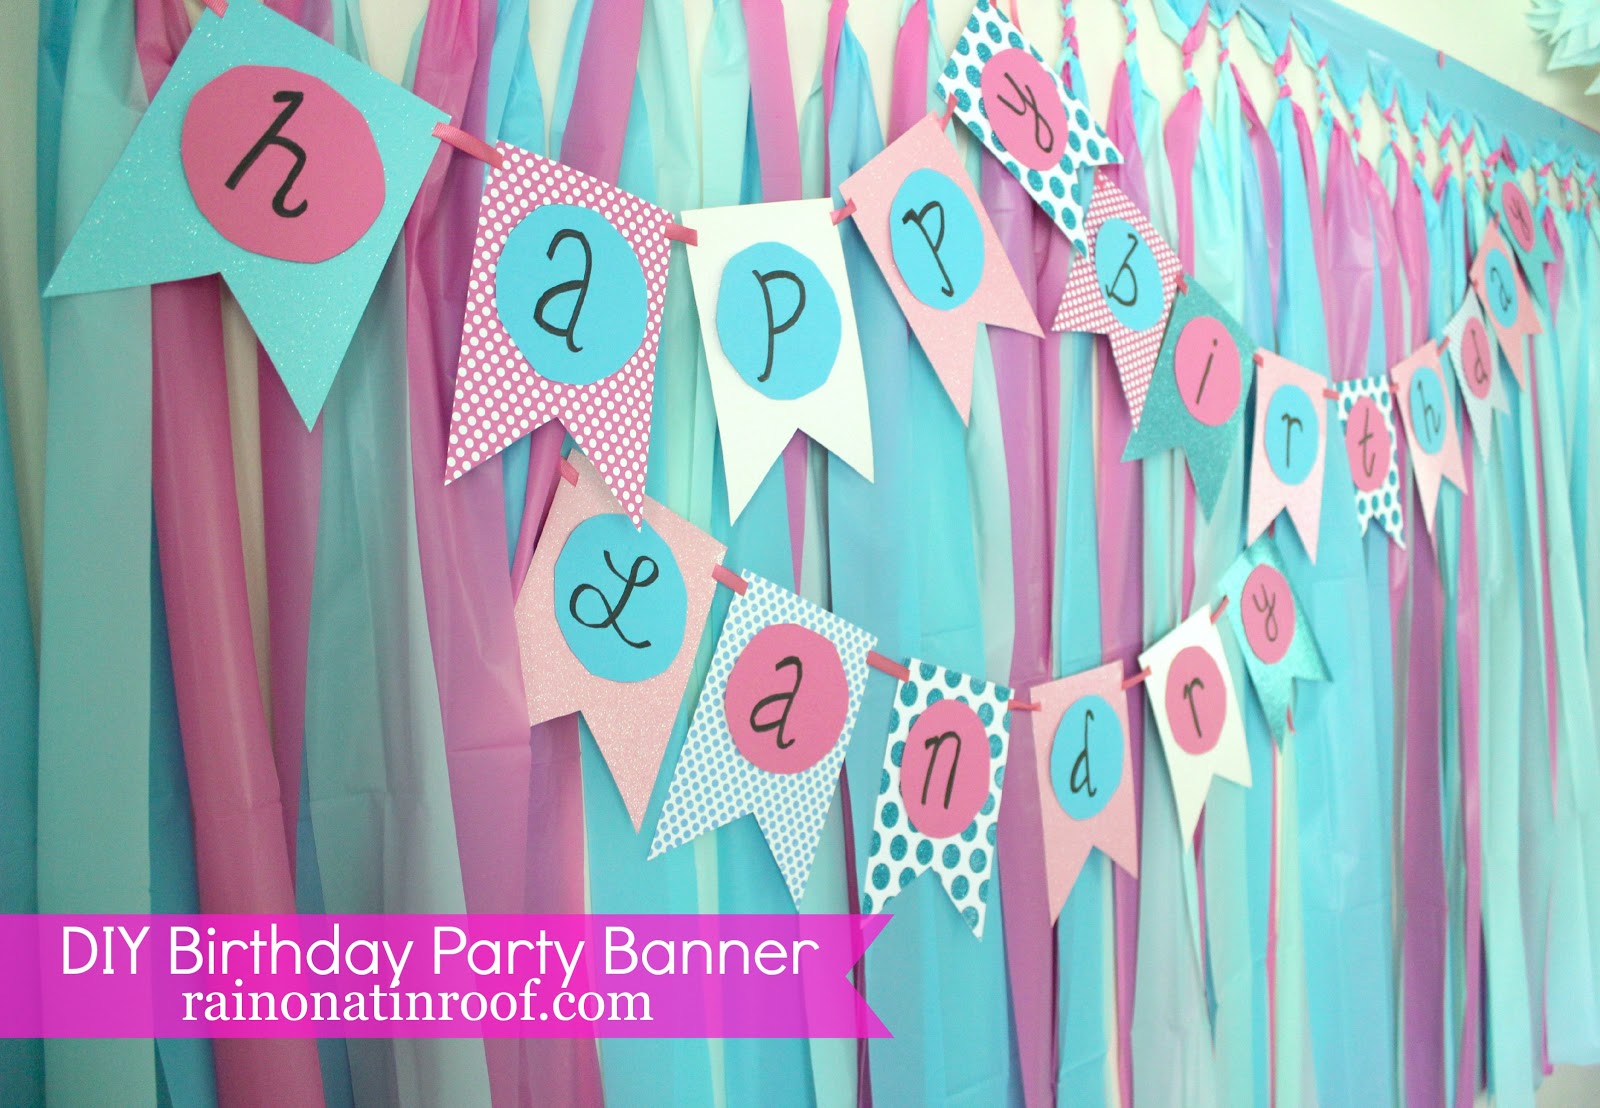 Cheap Diy Party Decorations  The House Decoration